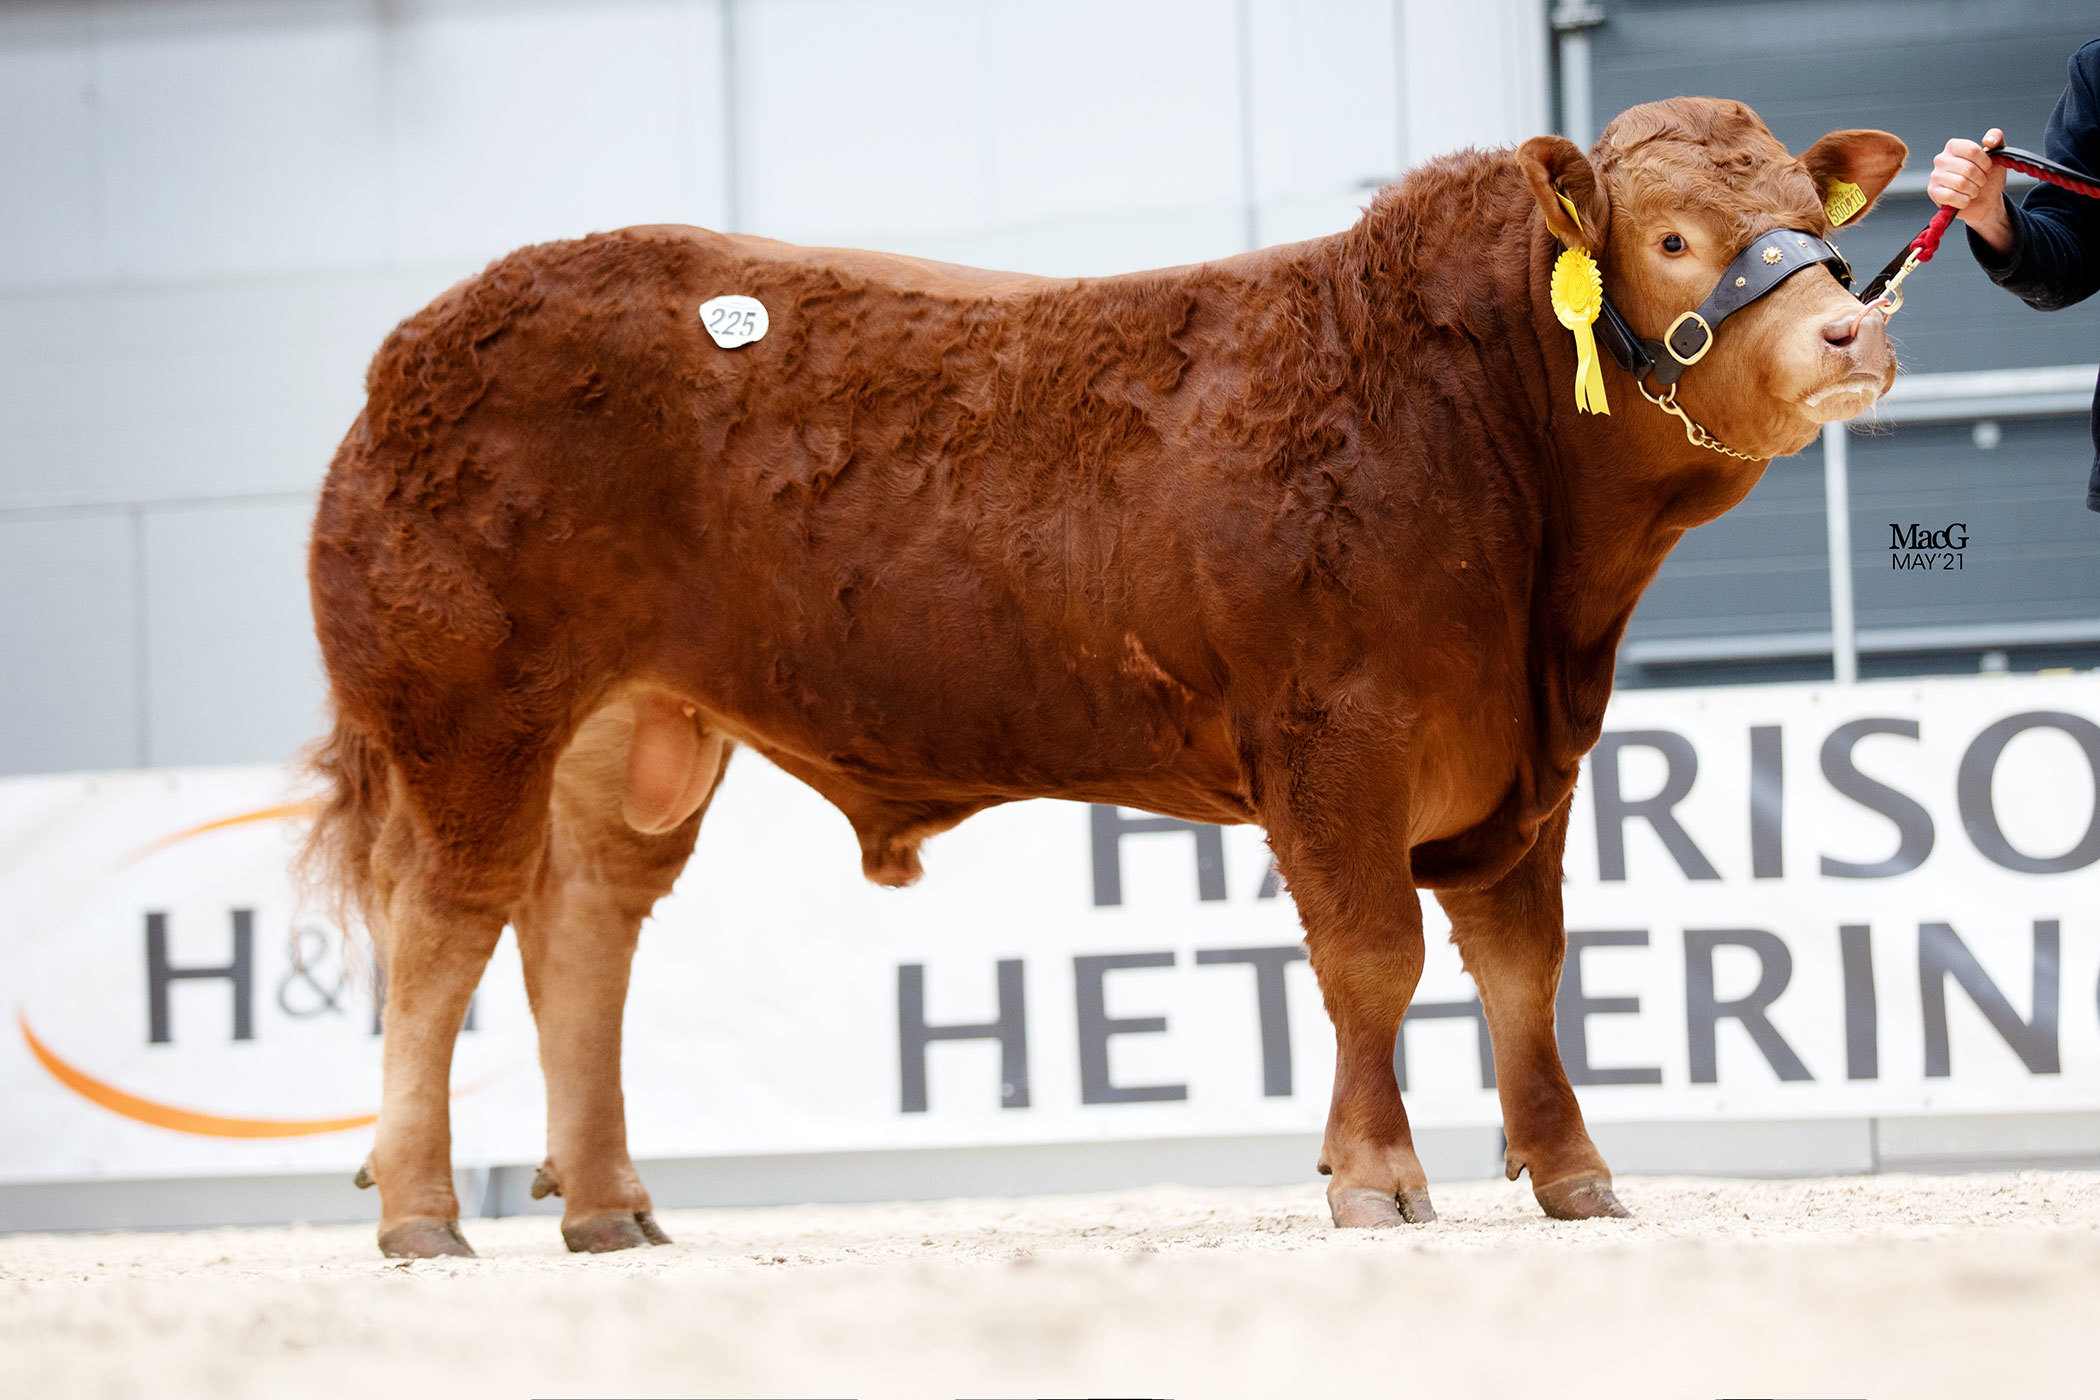 Tillside Predator made 40,000gns for young Tom Summers